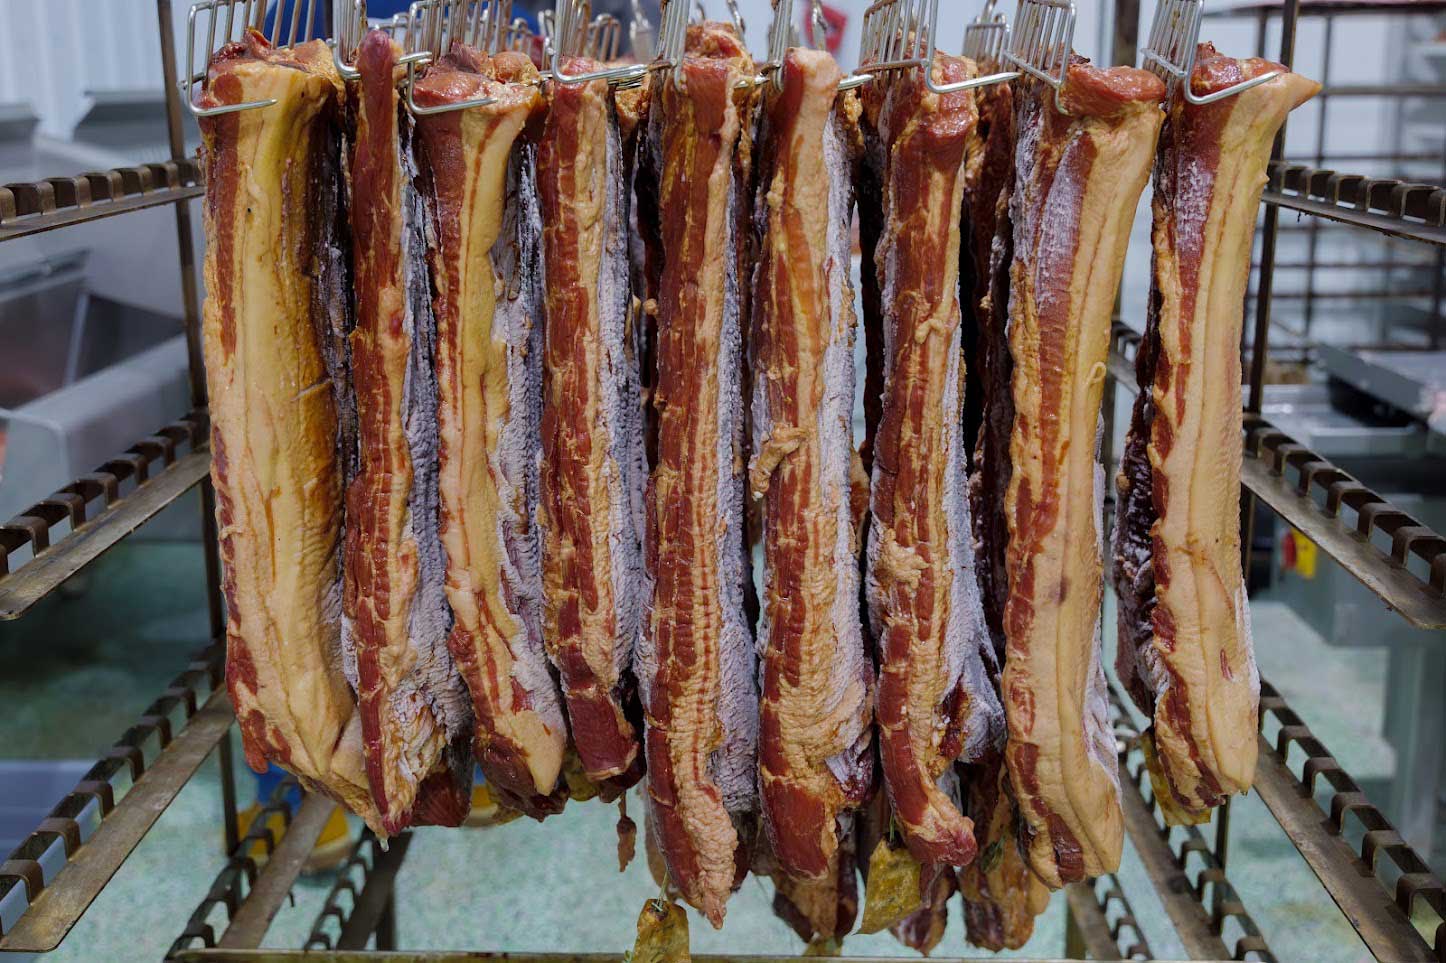 Bacon hanging on a rack